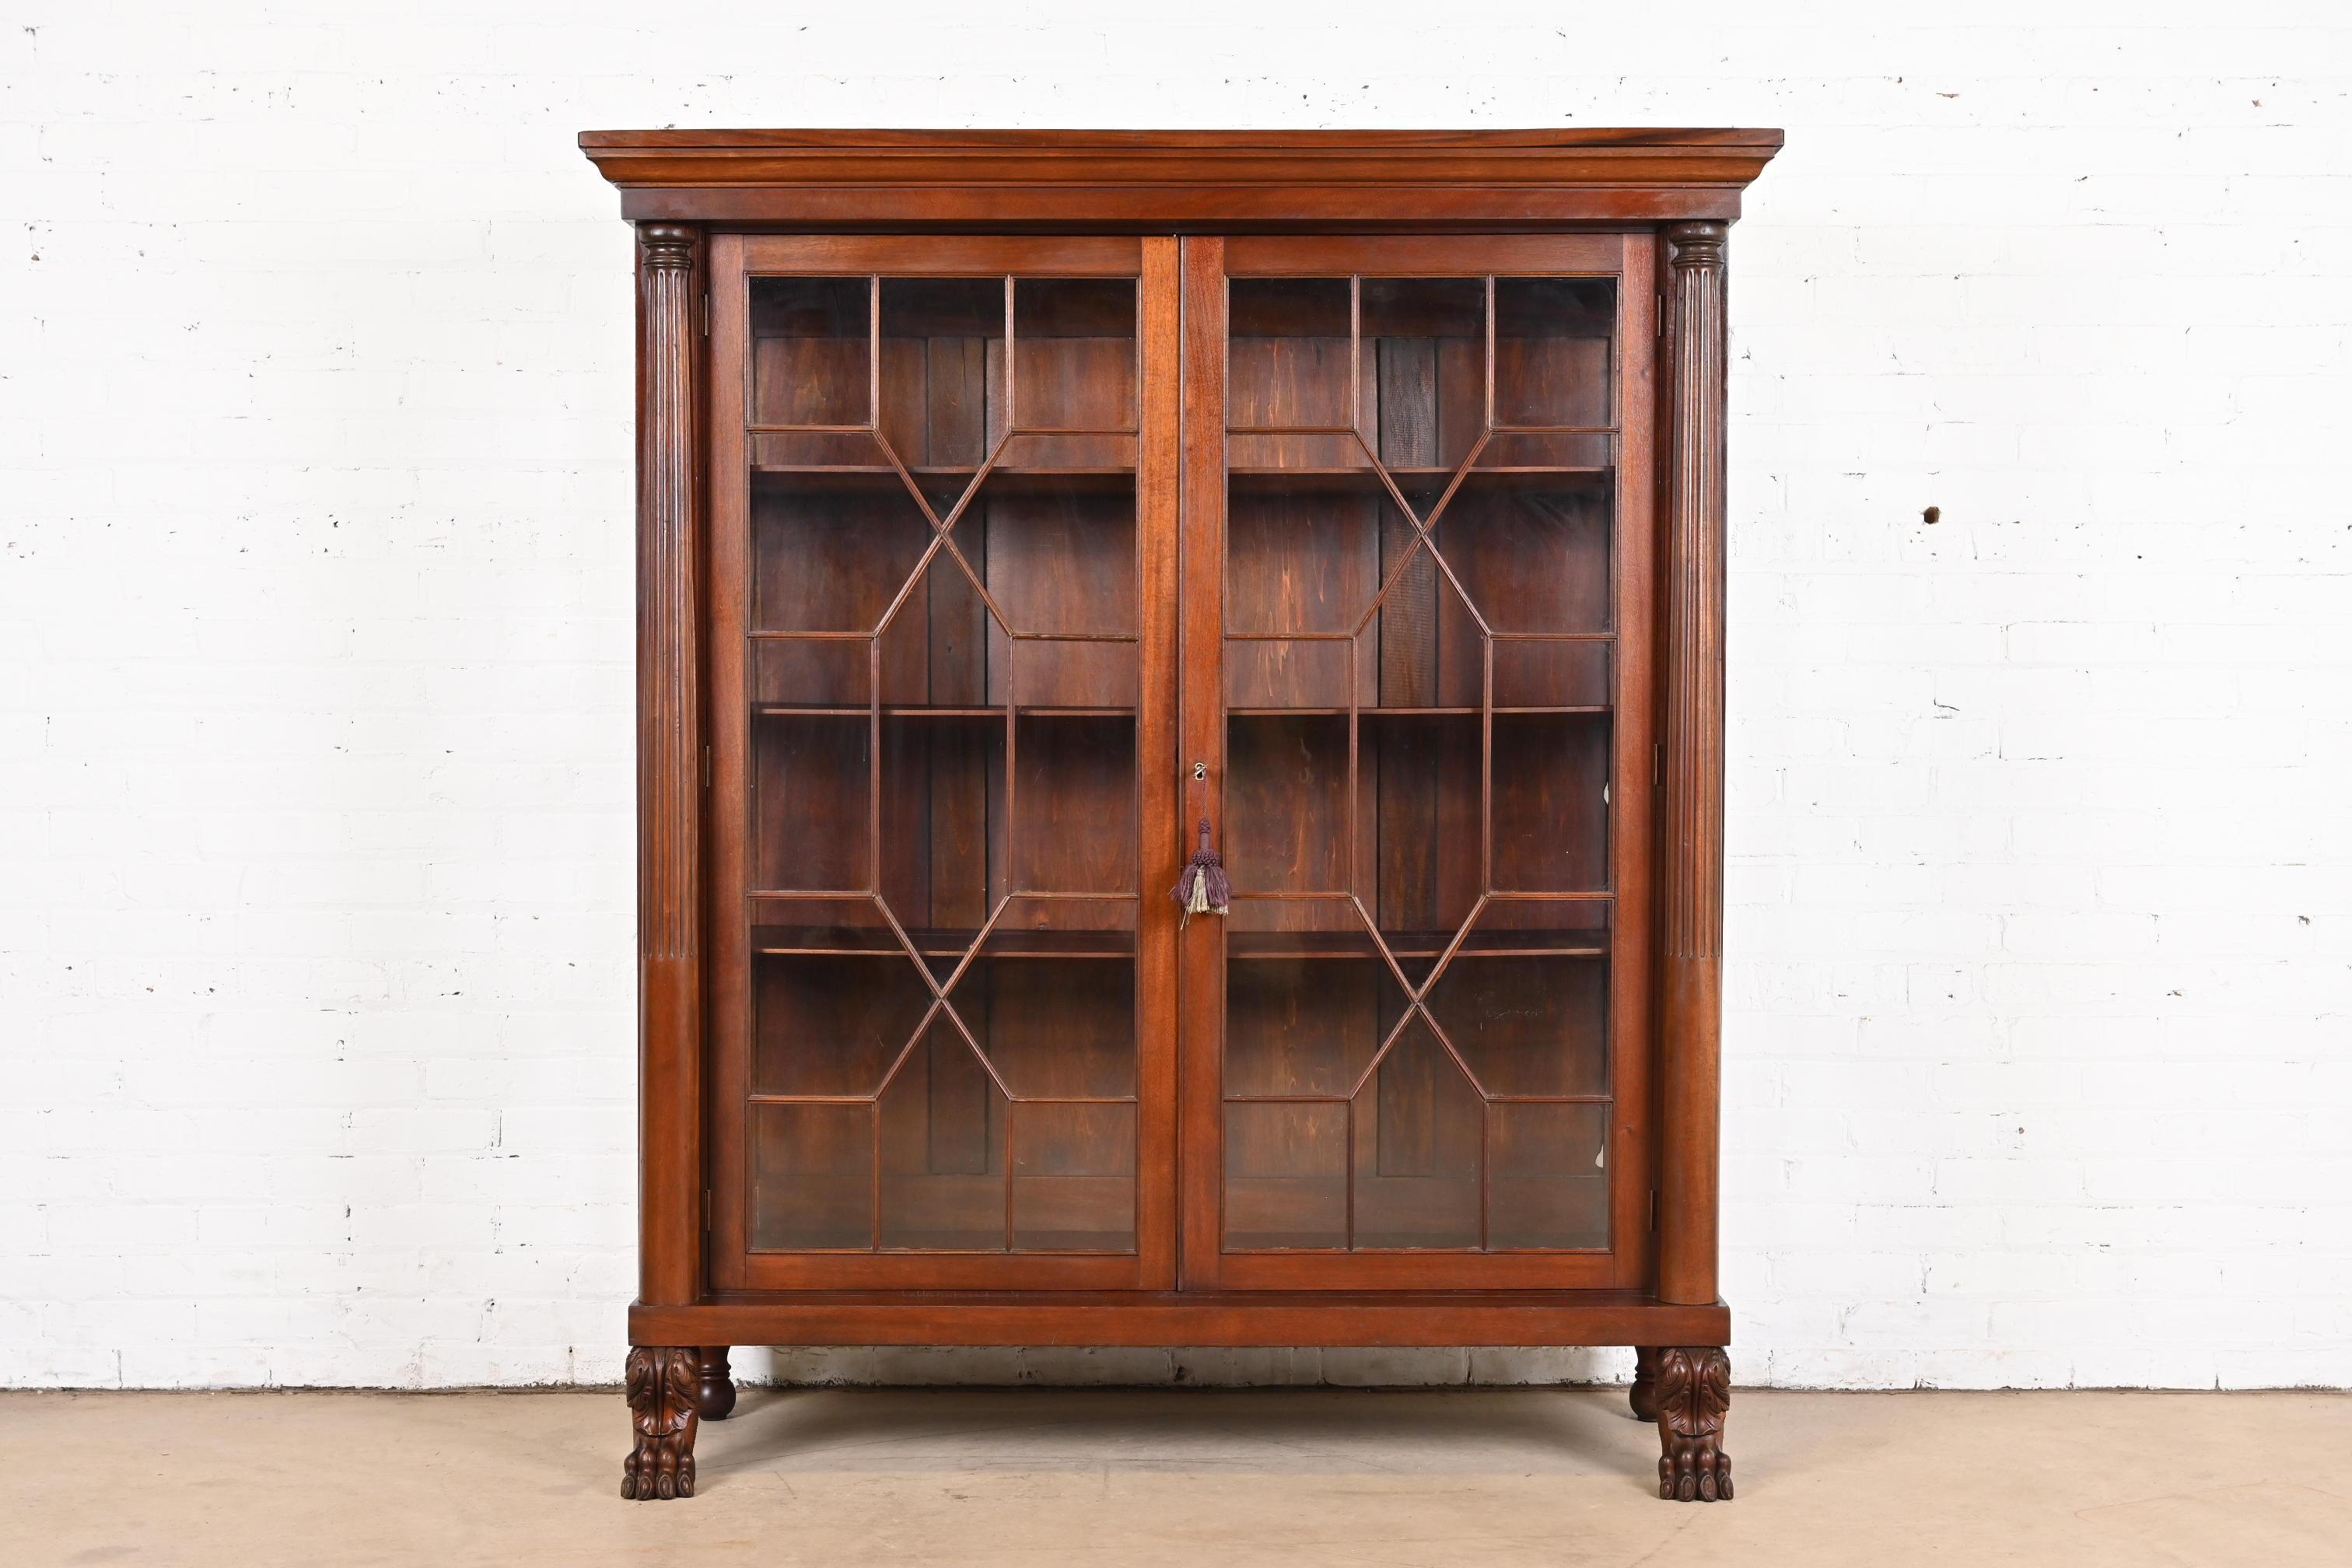 A beautiful antique American Empire or Victorian glass front bookcase with carved columns and lion paw feet

In the manner of R.J. Horner

USA, Circa 1890s

Carved mahogany, with mullioned glass front doors and sides. Cabinet locks, and key is